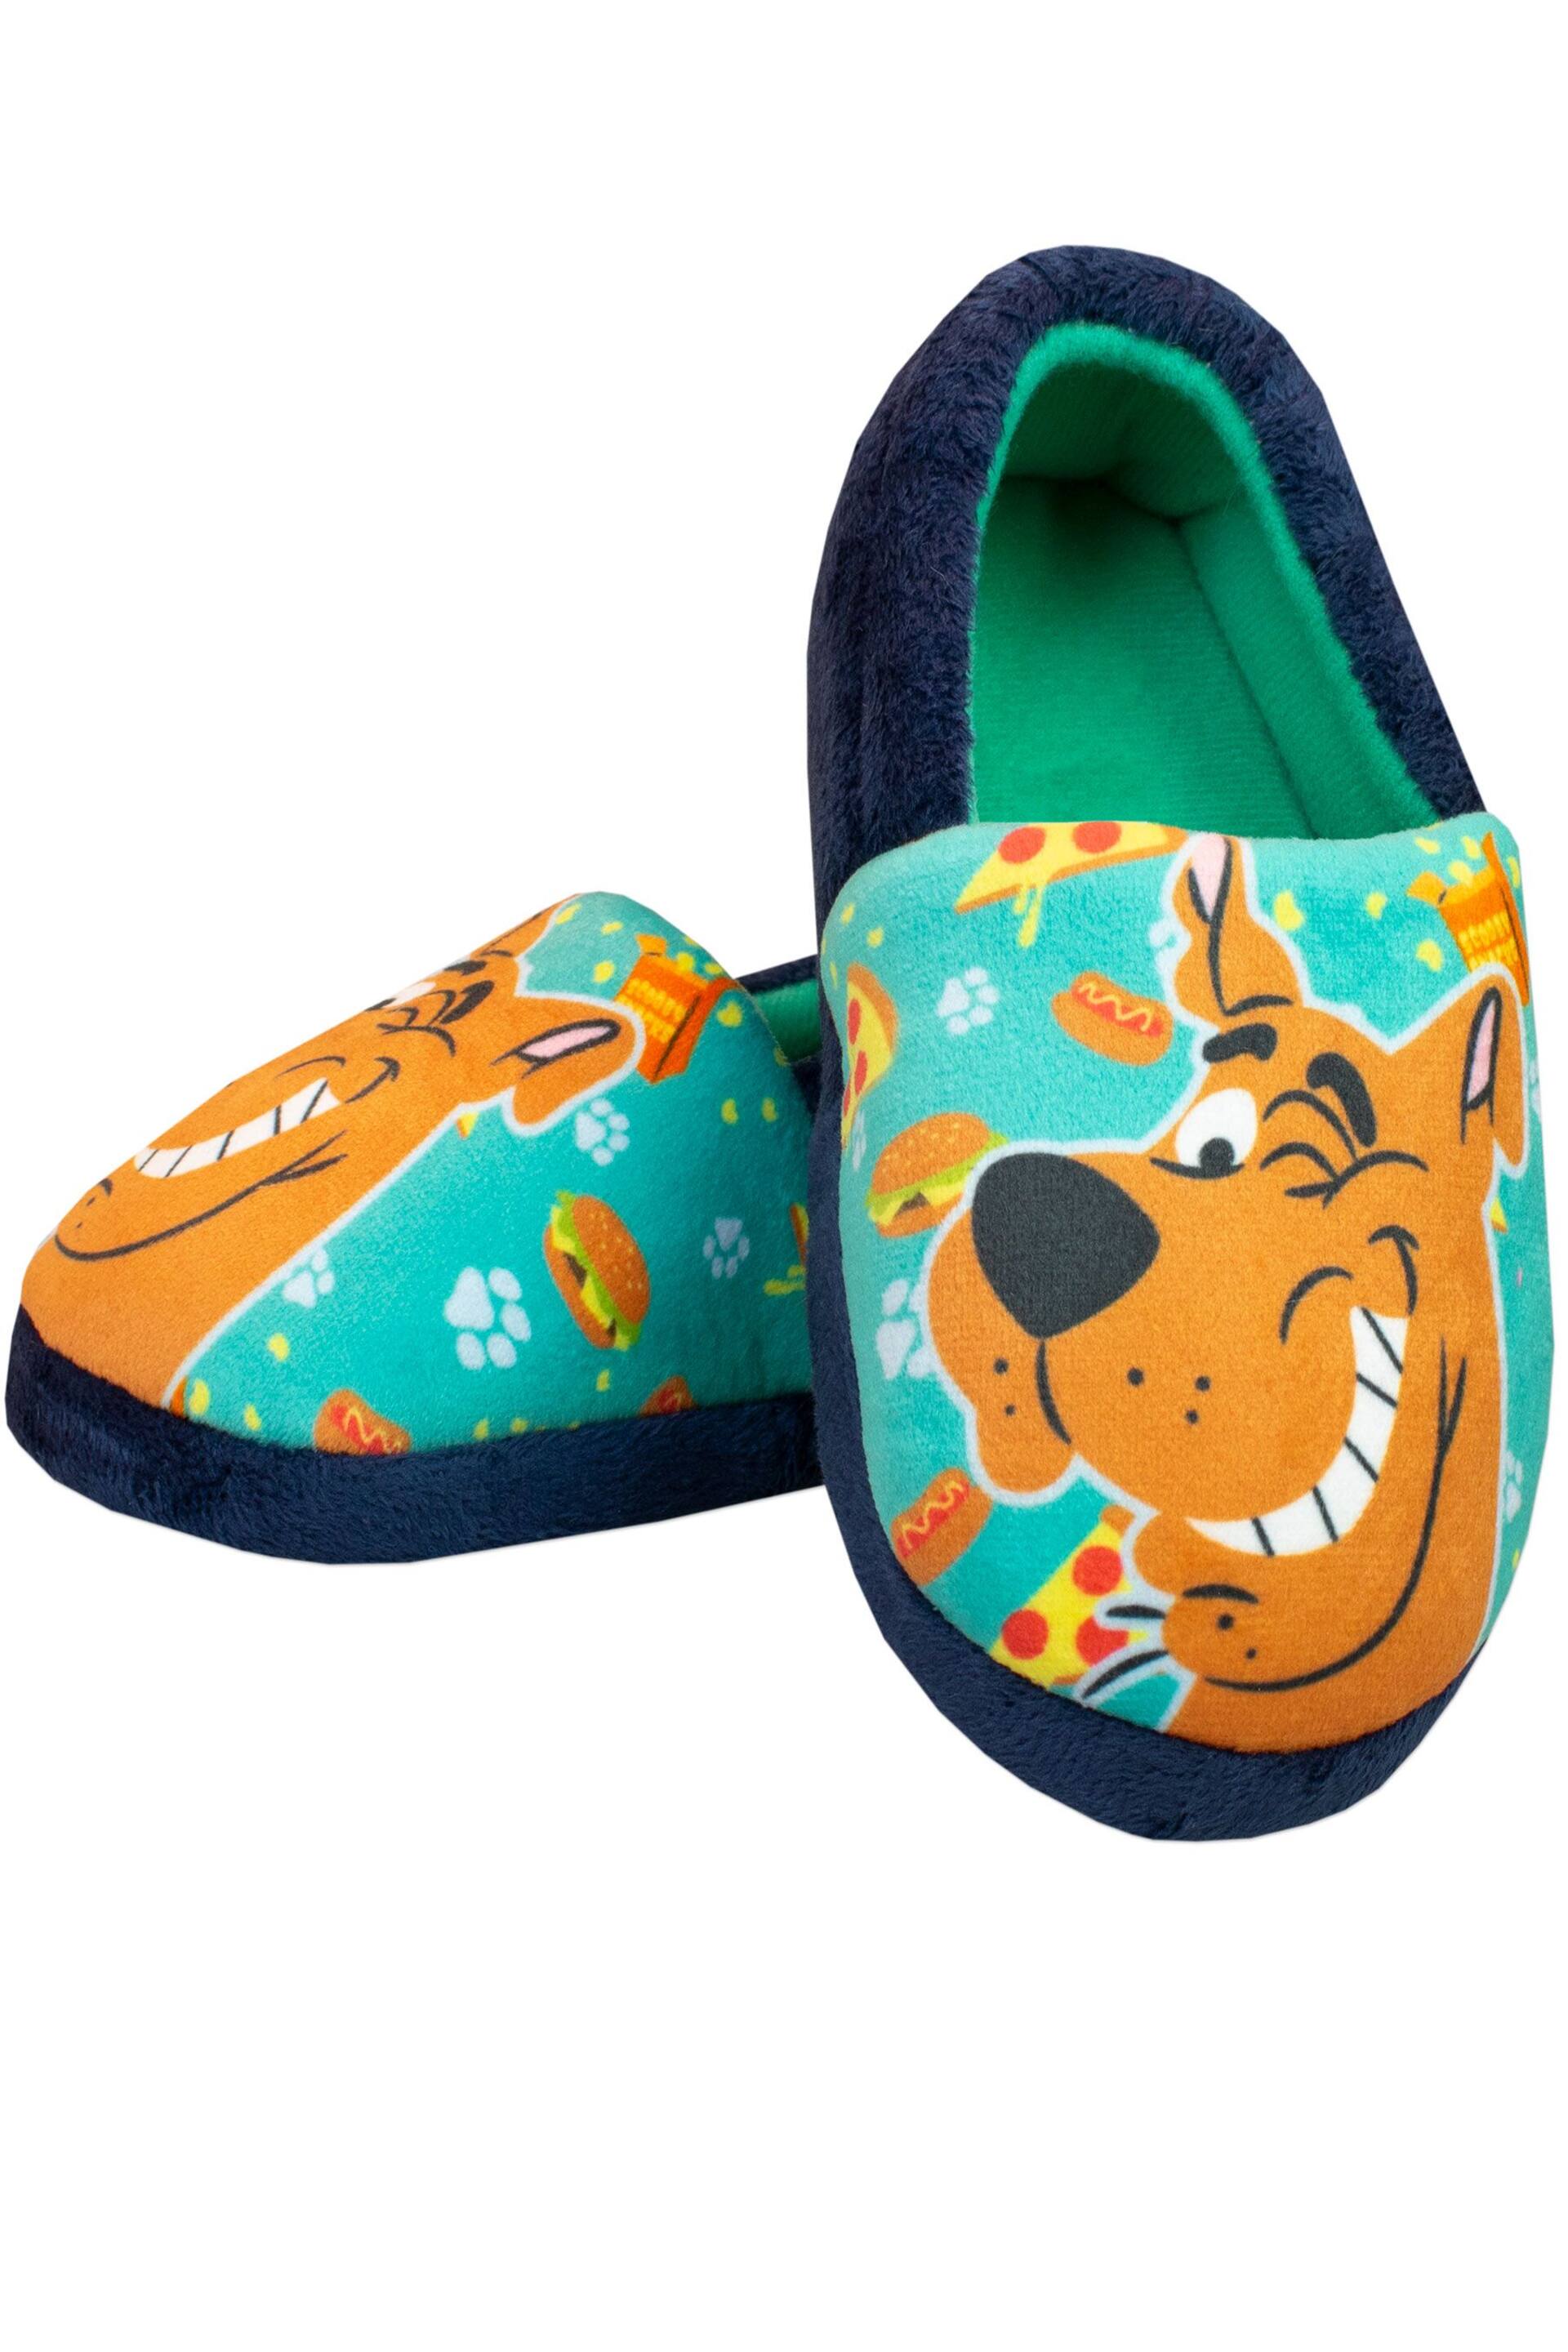 Character Blue Scooby-dooby-doo Slippers - Image 2 of 5